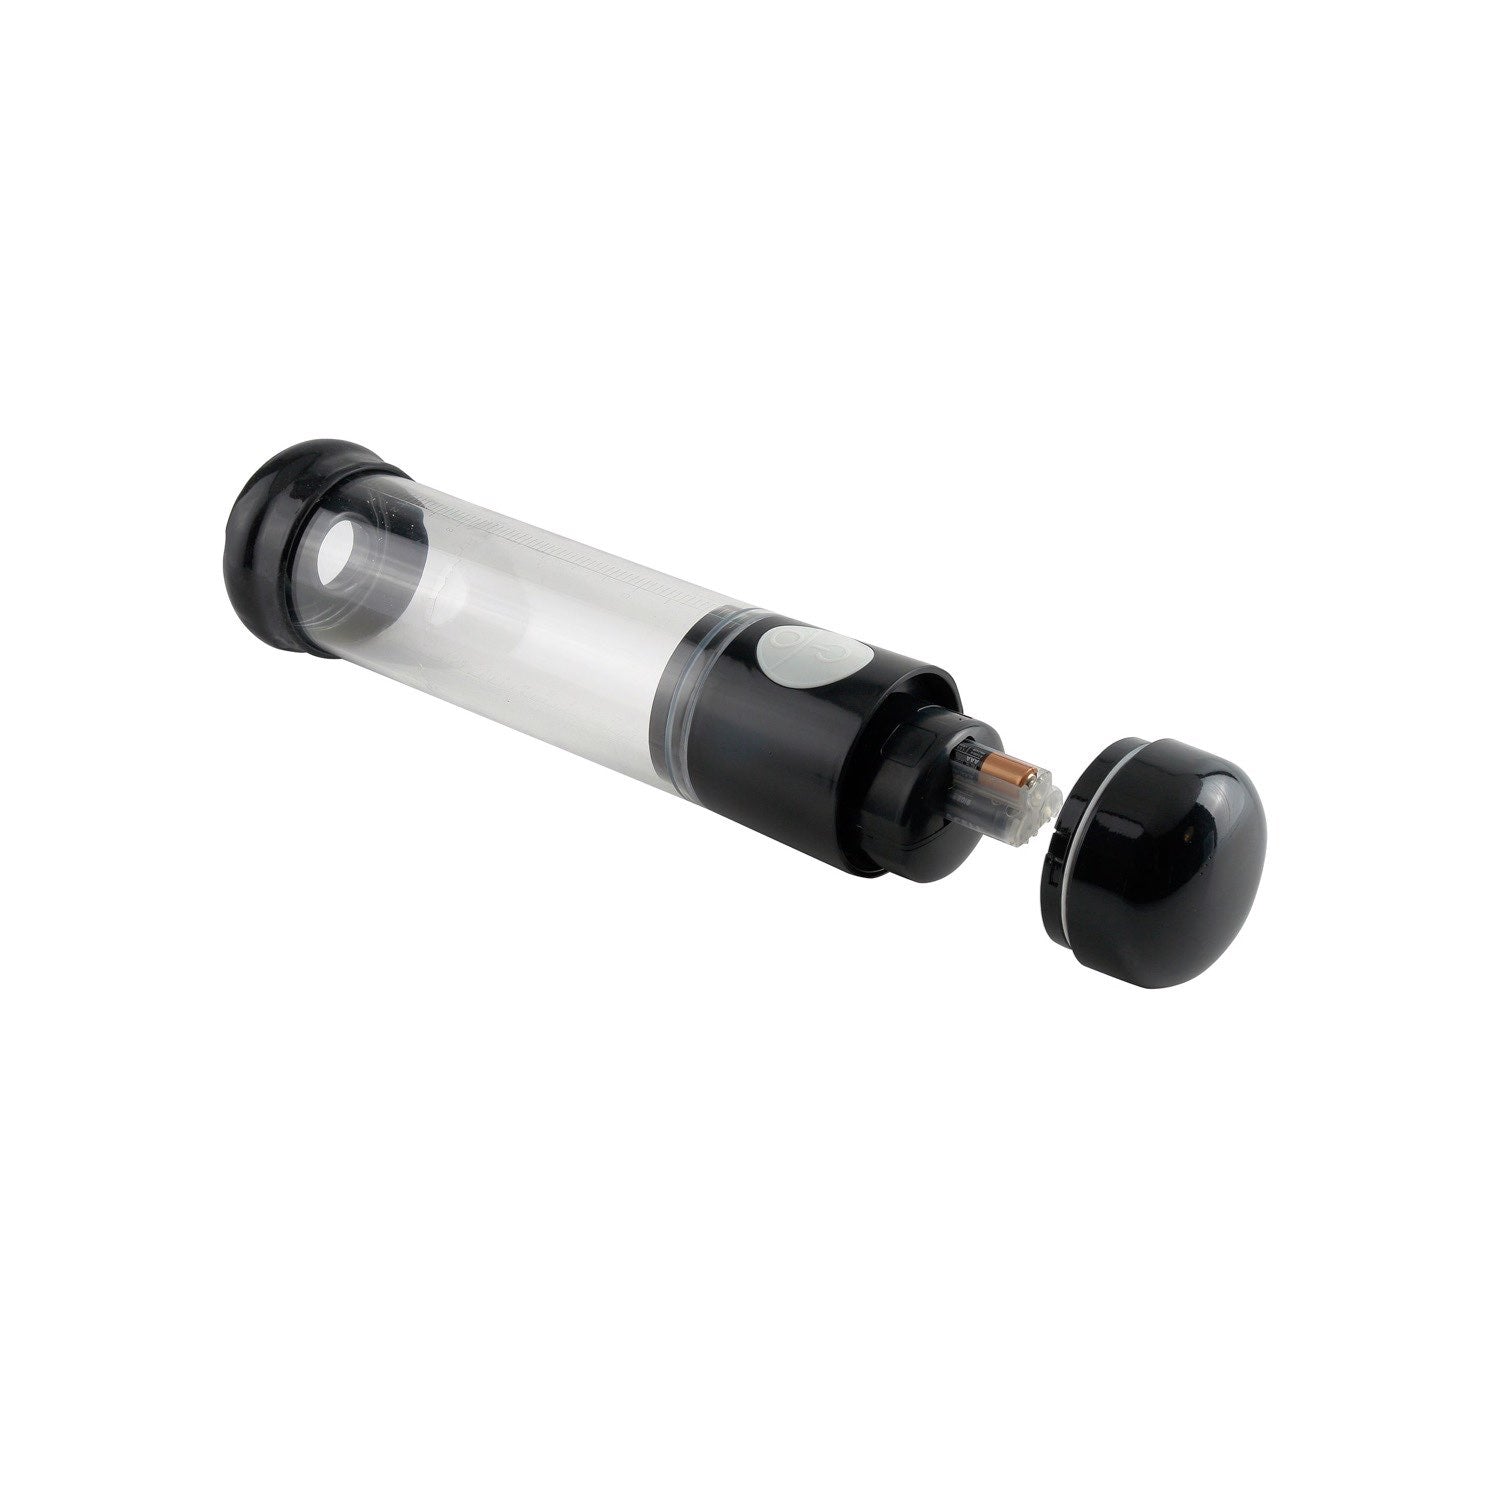 Pump Worx Auto-vac Power Pump - Black/Clear Automatic Penis Pump by Pipedream